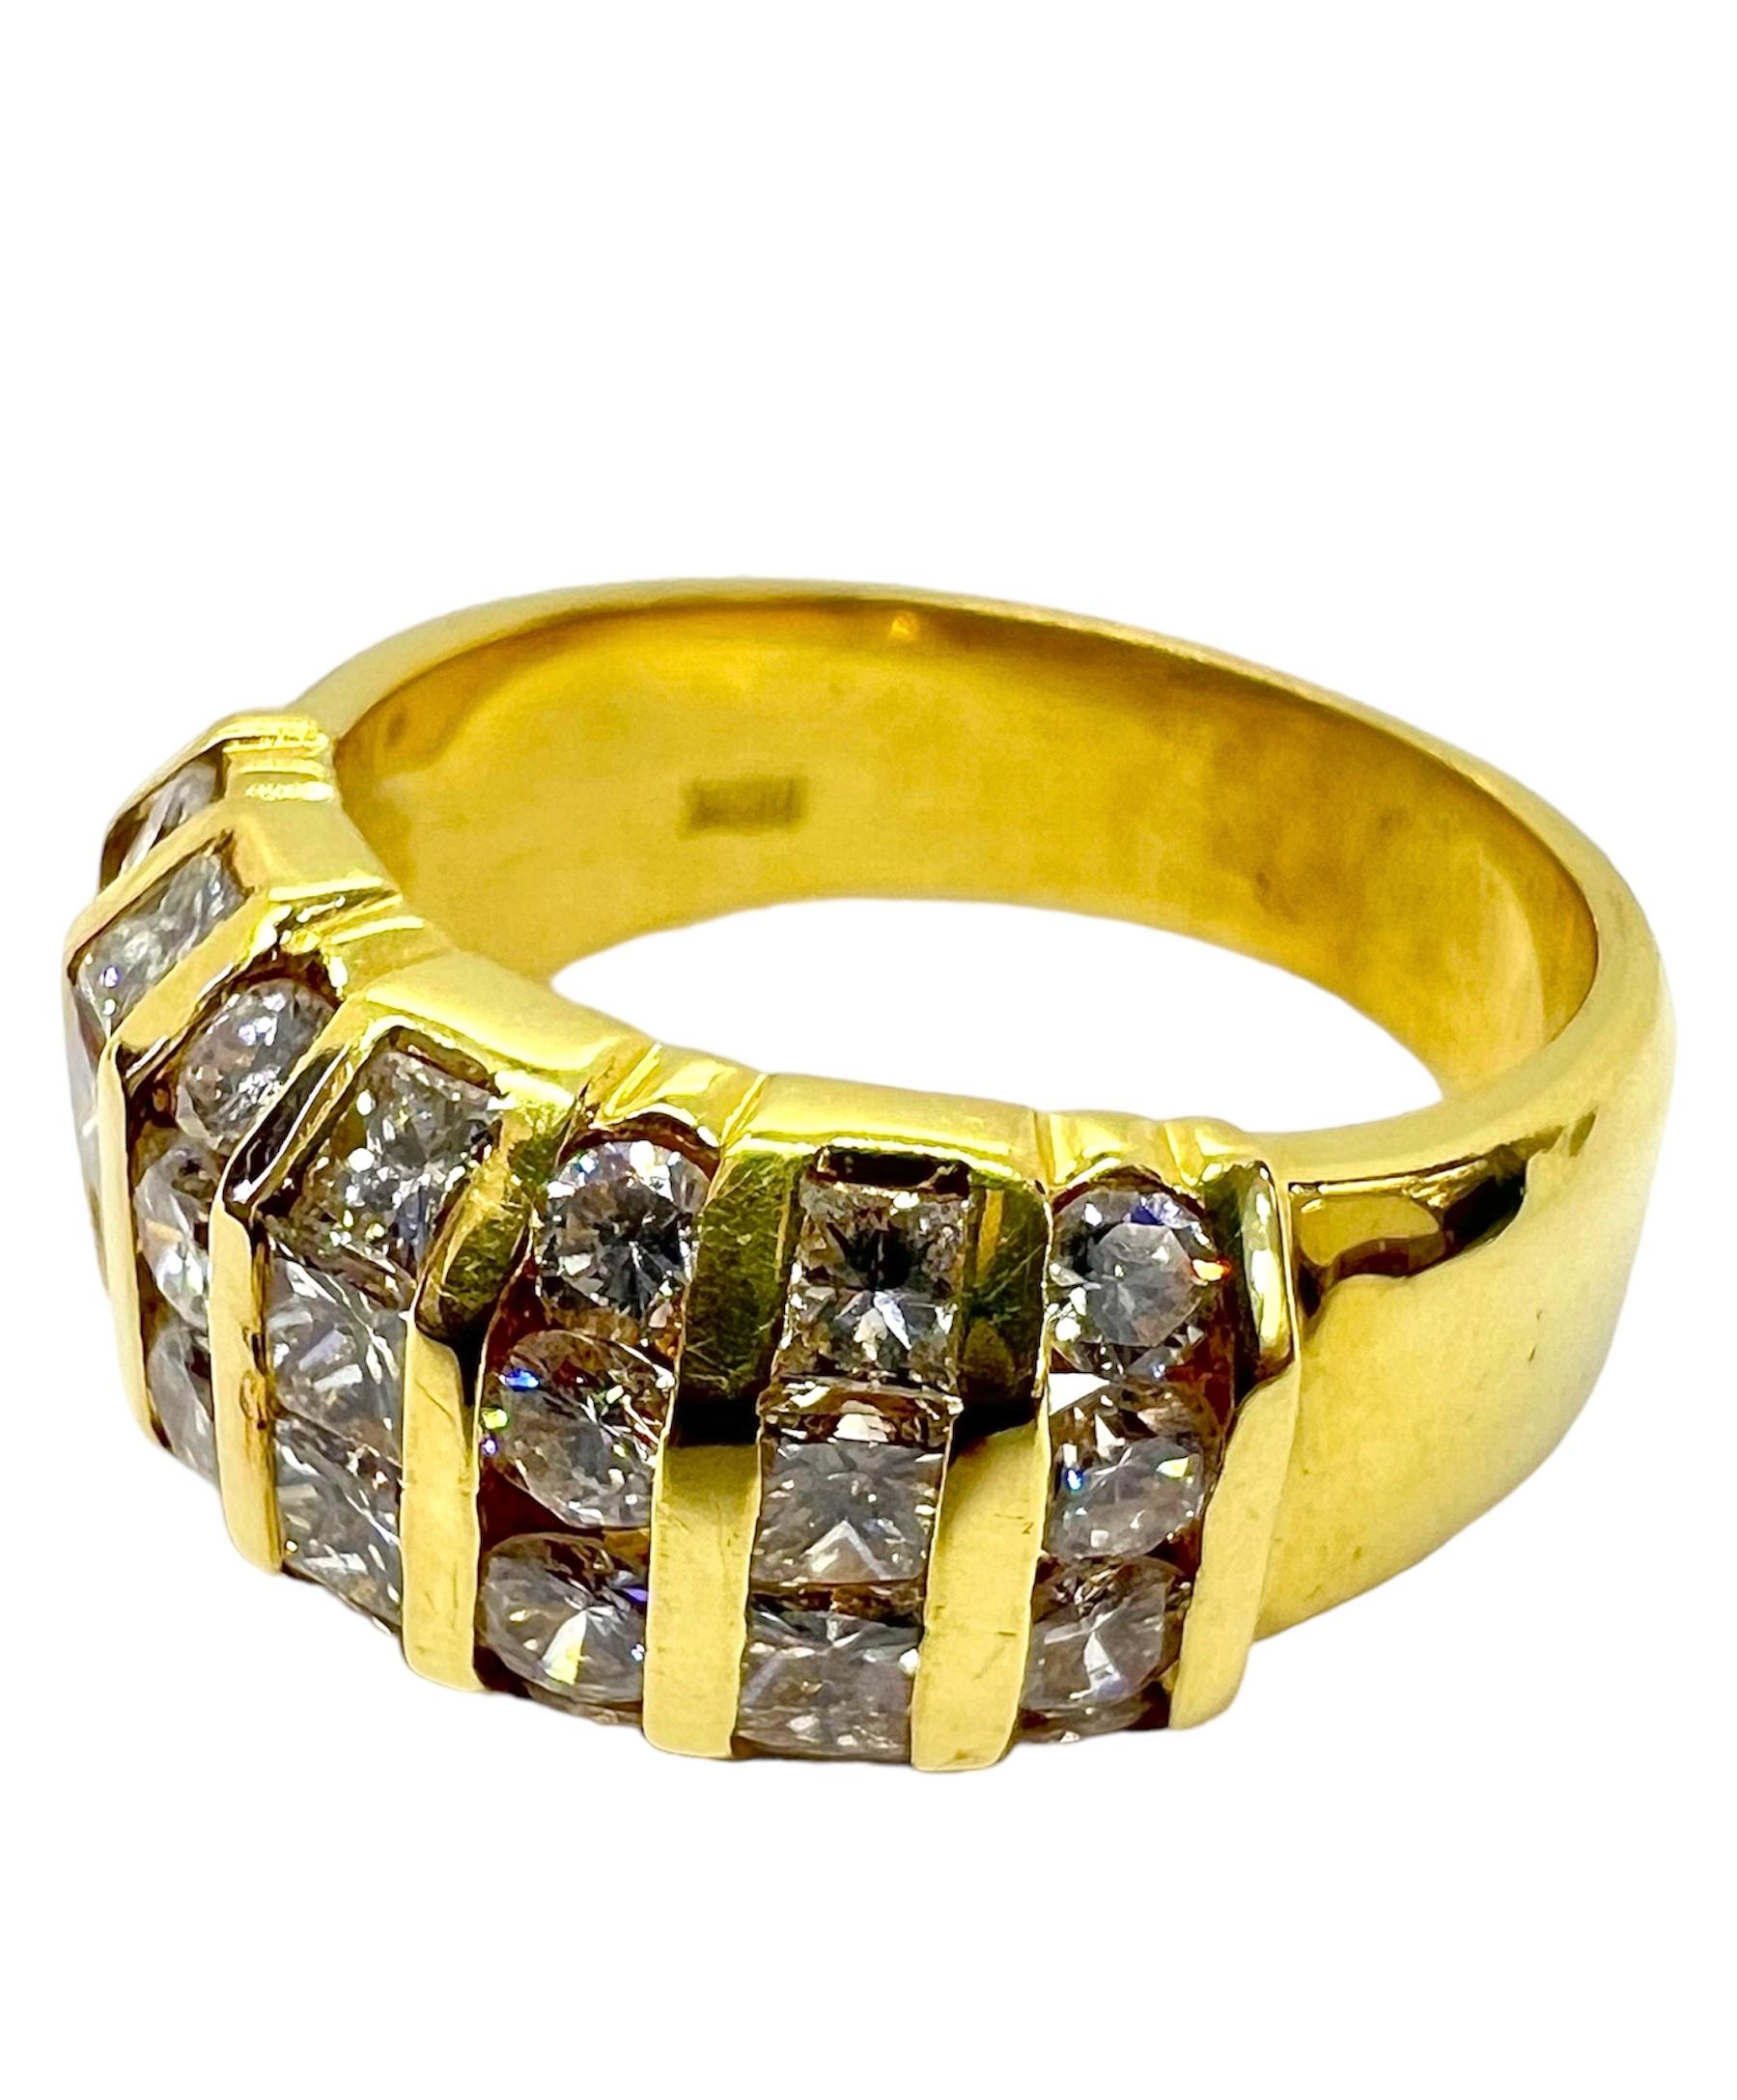 18K yellow gold diamond ring with round diamonds.

Sophia D by Joseph Dardashti LTD has been known worldwide for 35 years and are inspired by classic Art Deco design that merges with modern manufacturing techniques.  